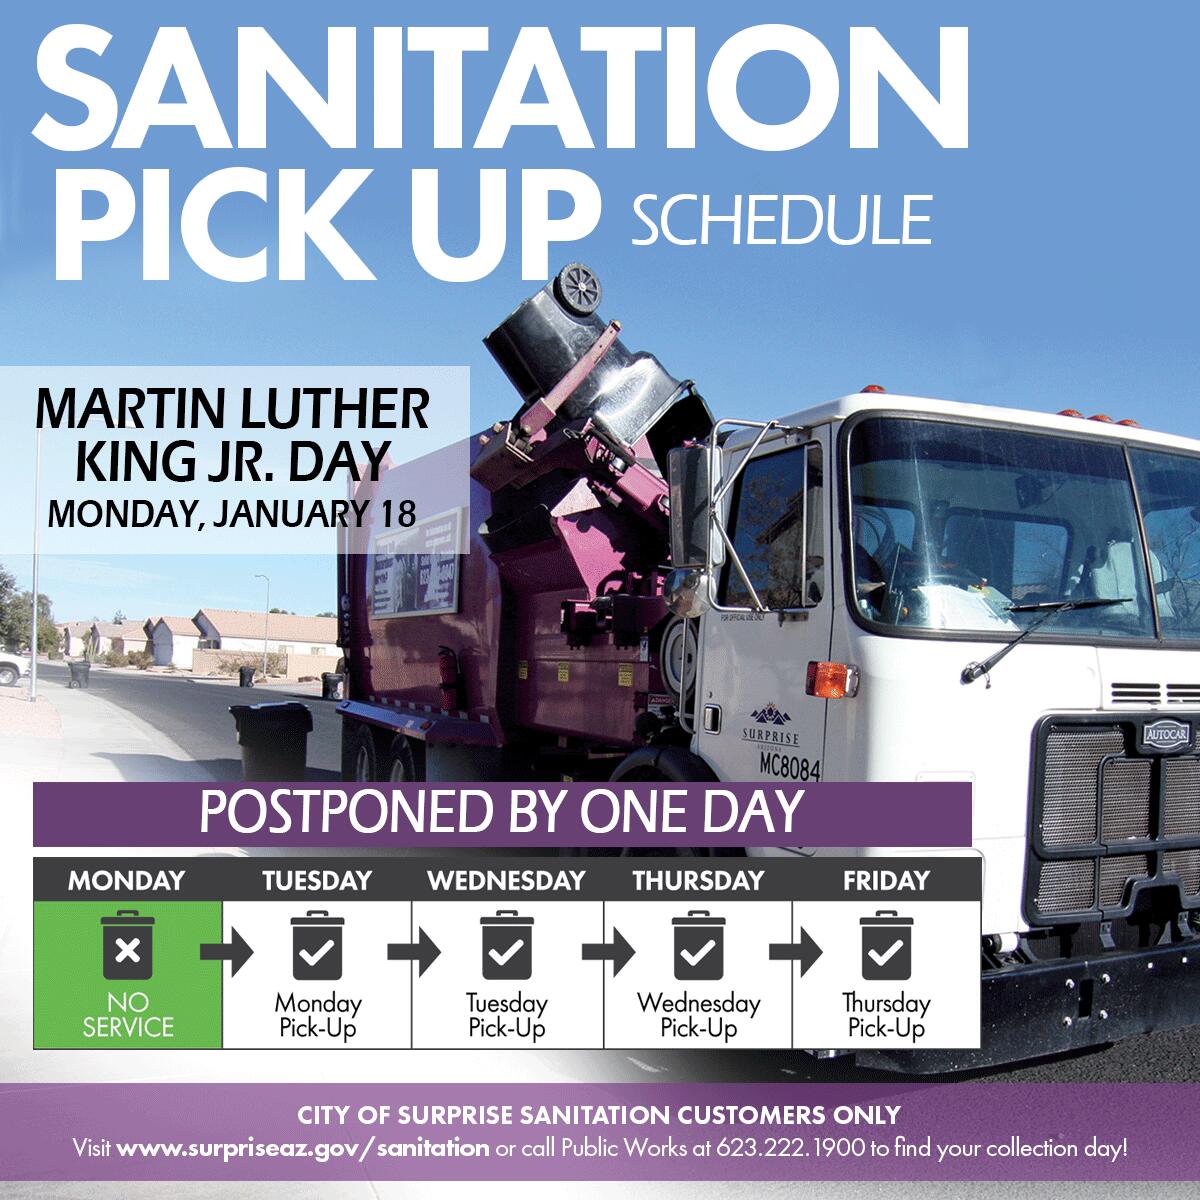 City of Surprise trash schedule changes and closures for MLK Day (City of Surprise) — Nextdoor